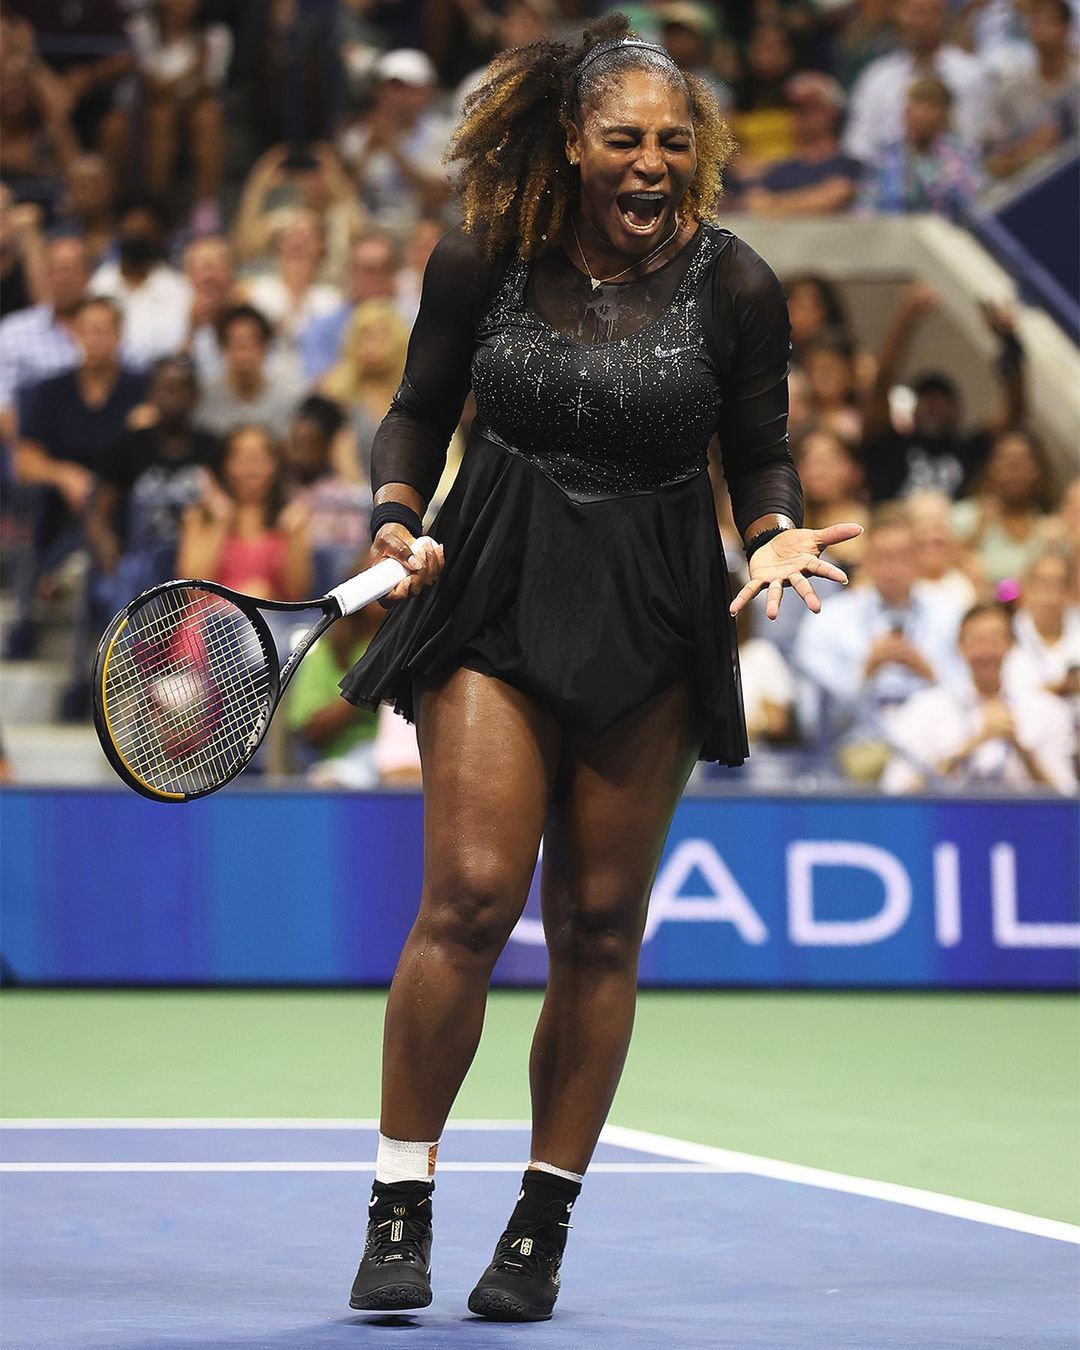 Serena Williams in diamond shoes at the 2022 US Open